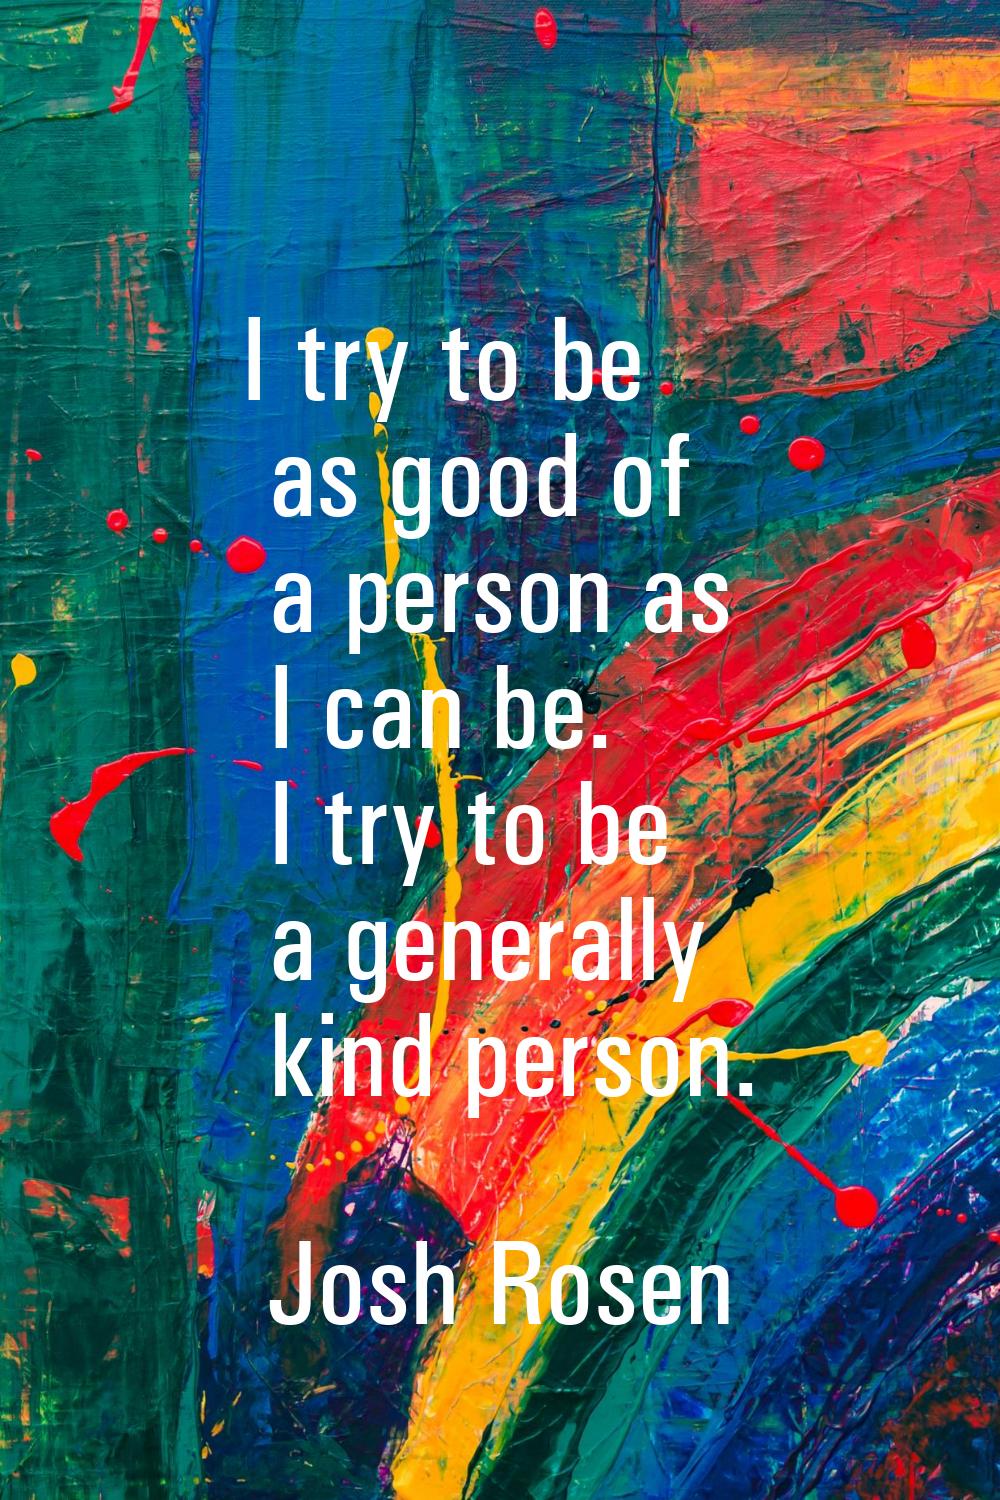 I try to be as good of a person as I can be. I try to be a generally kind person.